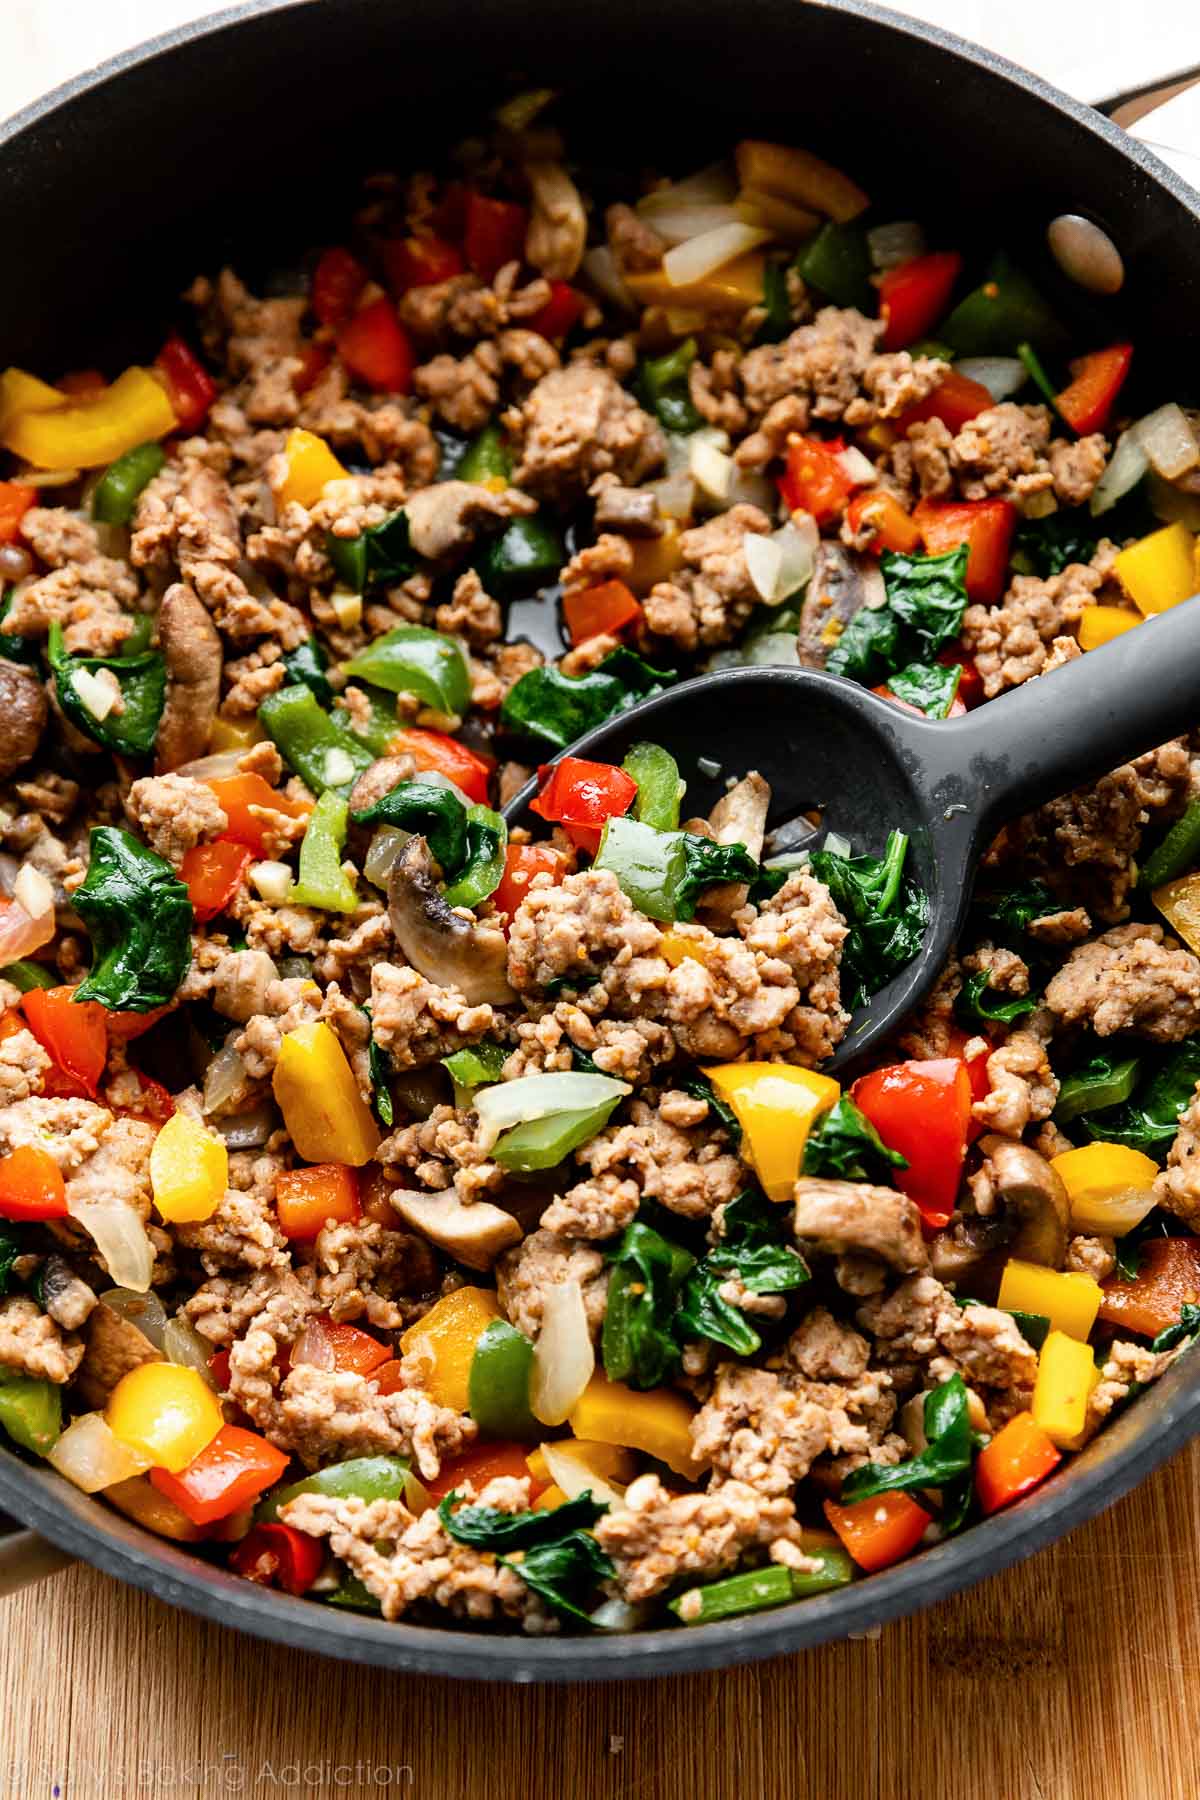 cooked sausage, mushrooms, bell peppers, and spinach in large skillet.